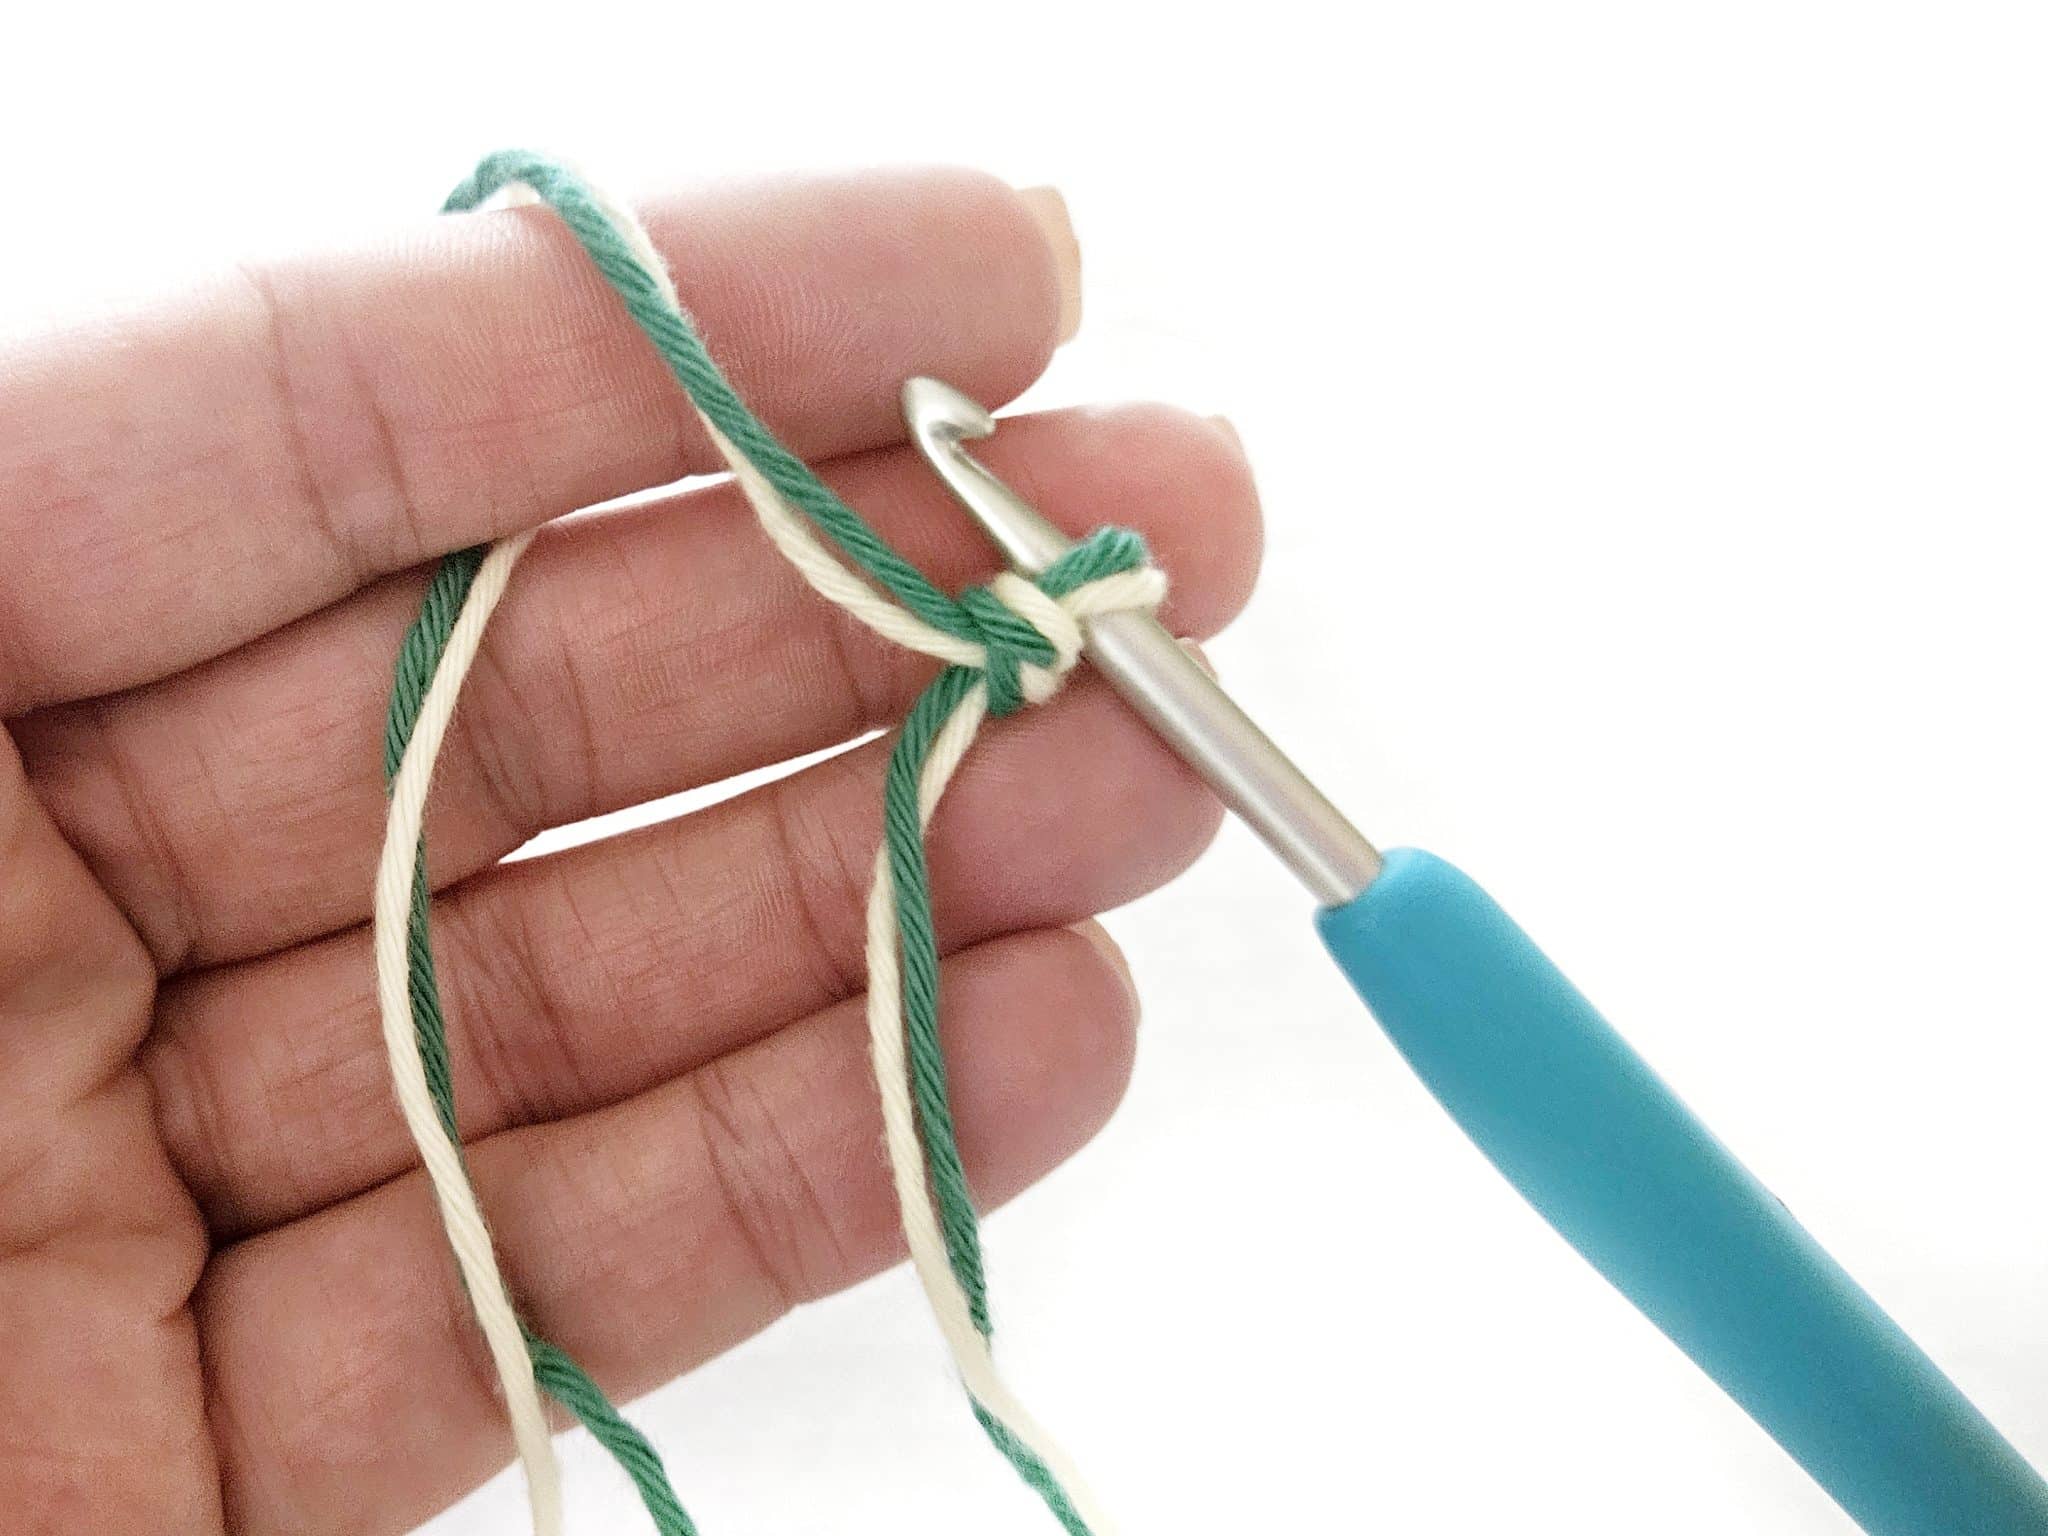 Beginner's Must-Have Crochet Supplies and Tools: The Essential